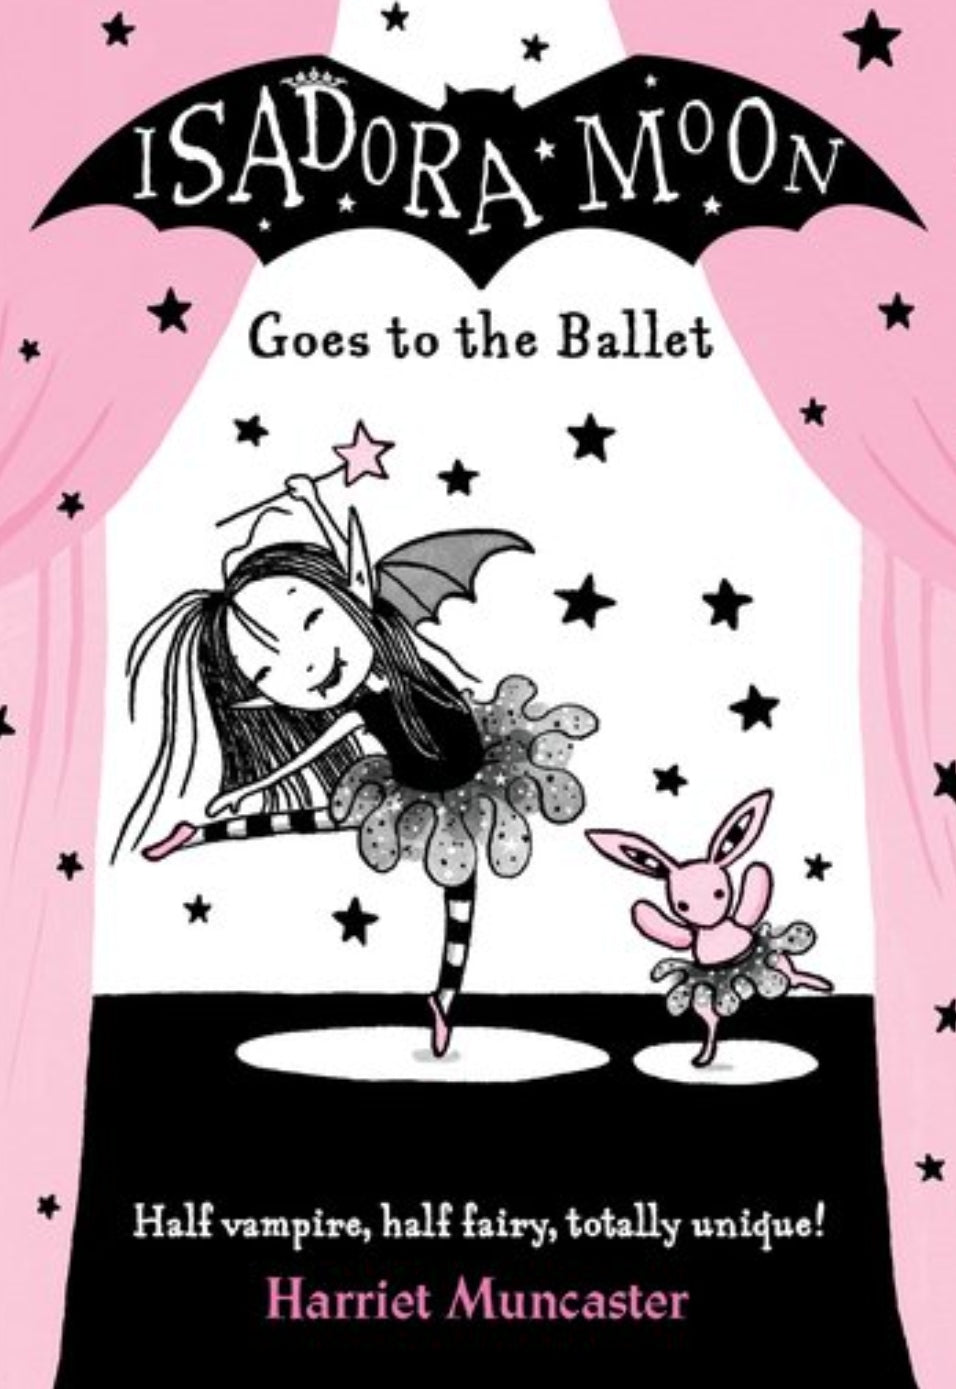 Isadora Moon Goes to Ballet